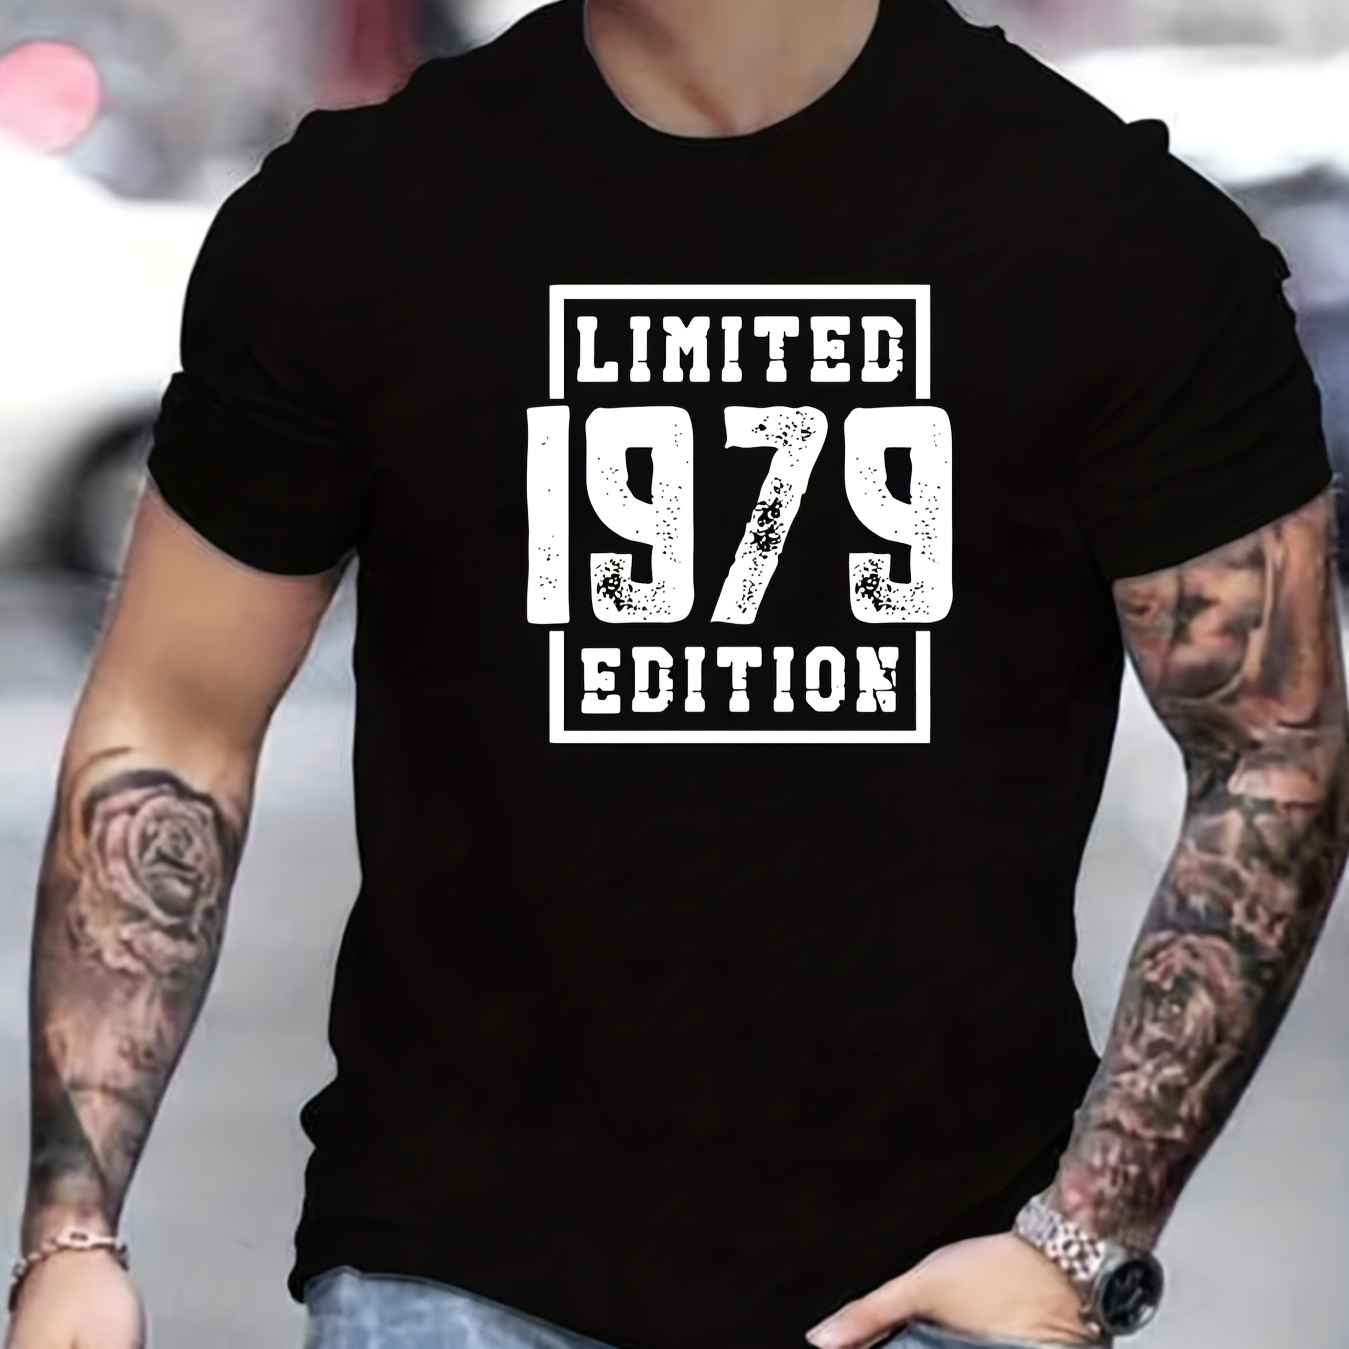 

Limited 1979 Edition Letters Print Casual Crew Neck Short Sleeve Tops For Men, Quick-drying Comfy Casual Summer T-shirt For Daily Wear Work Out And Vacation Resorts